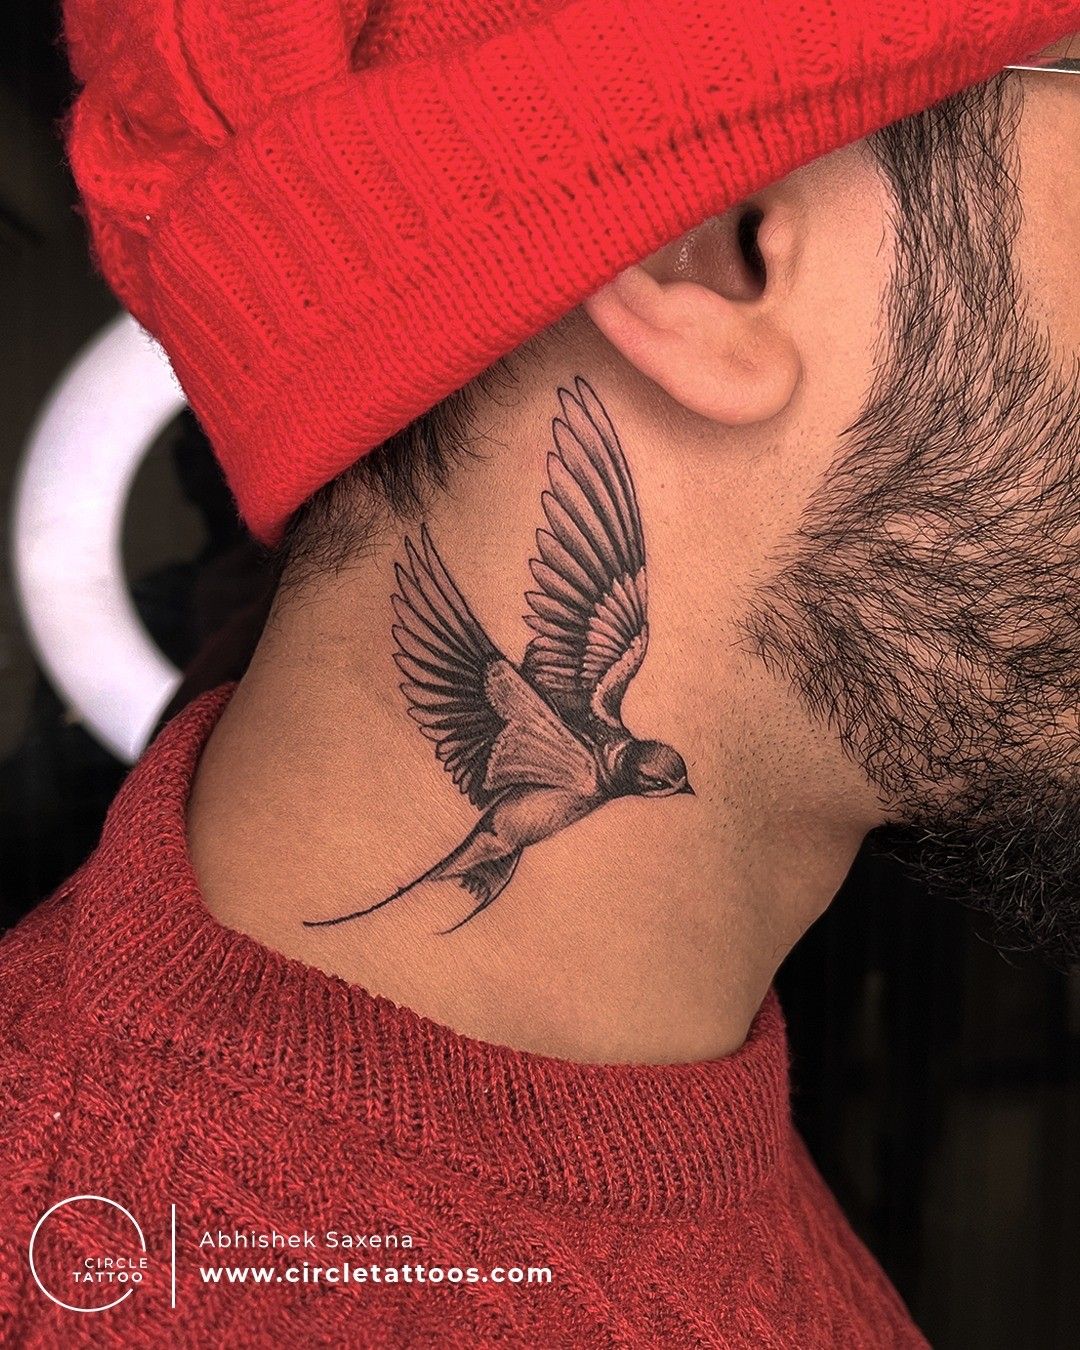 51 Simple Neck Tattoos For Guys- Expressing Personality With Understated  Neck Ink - Psycho Tats